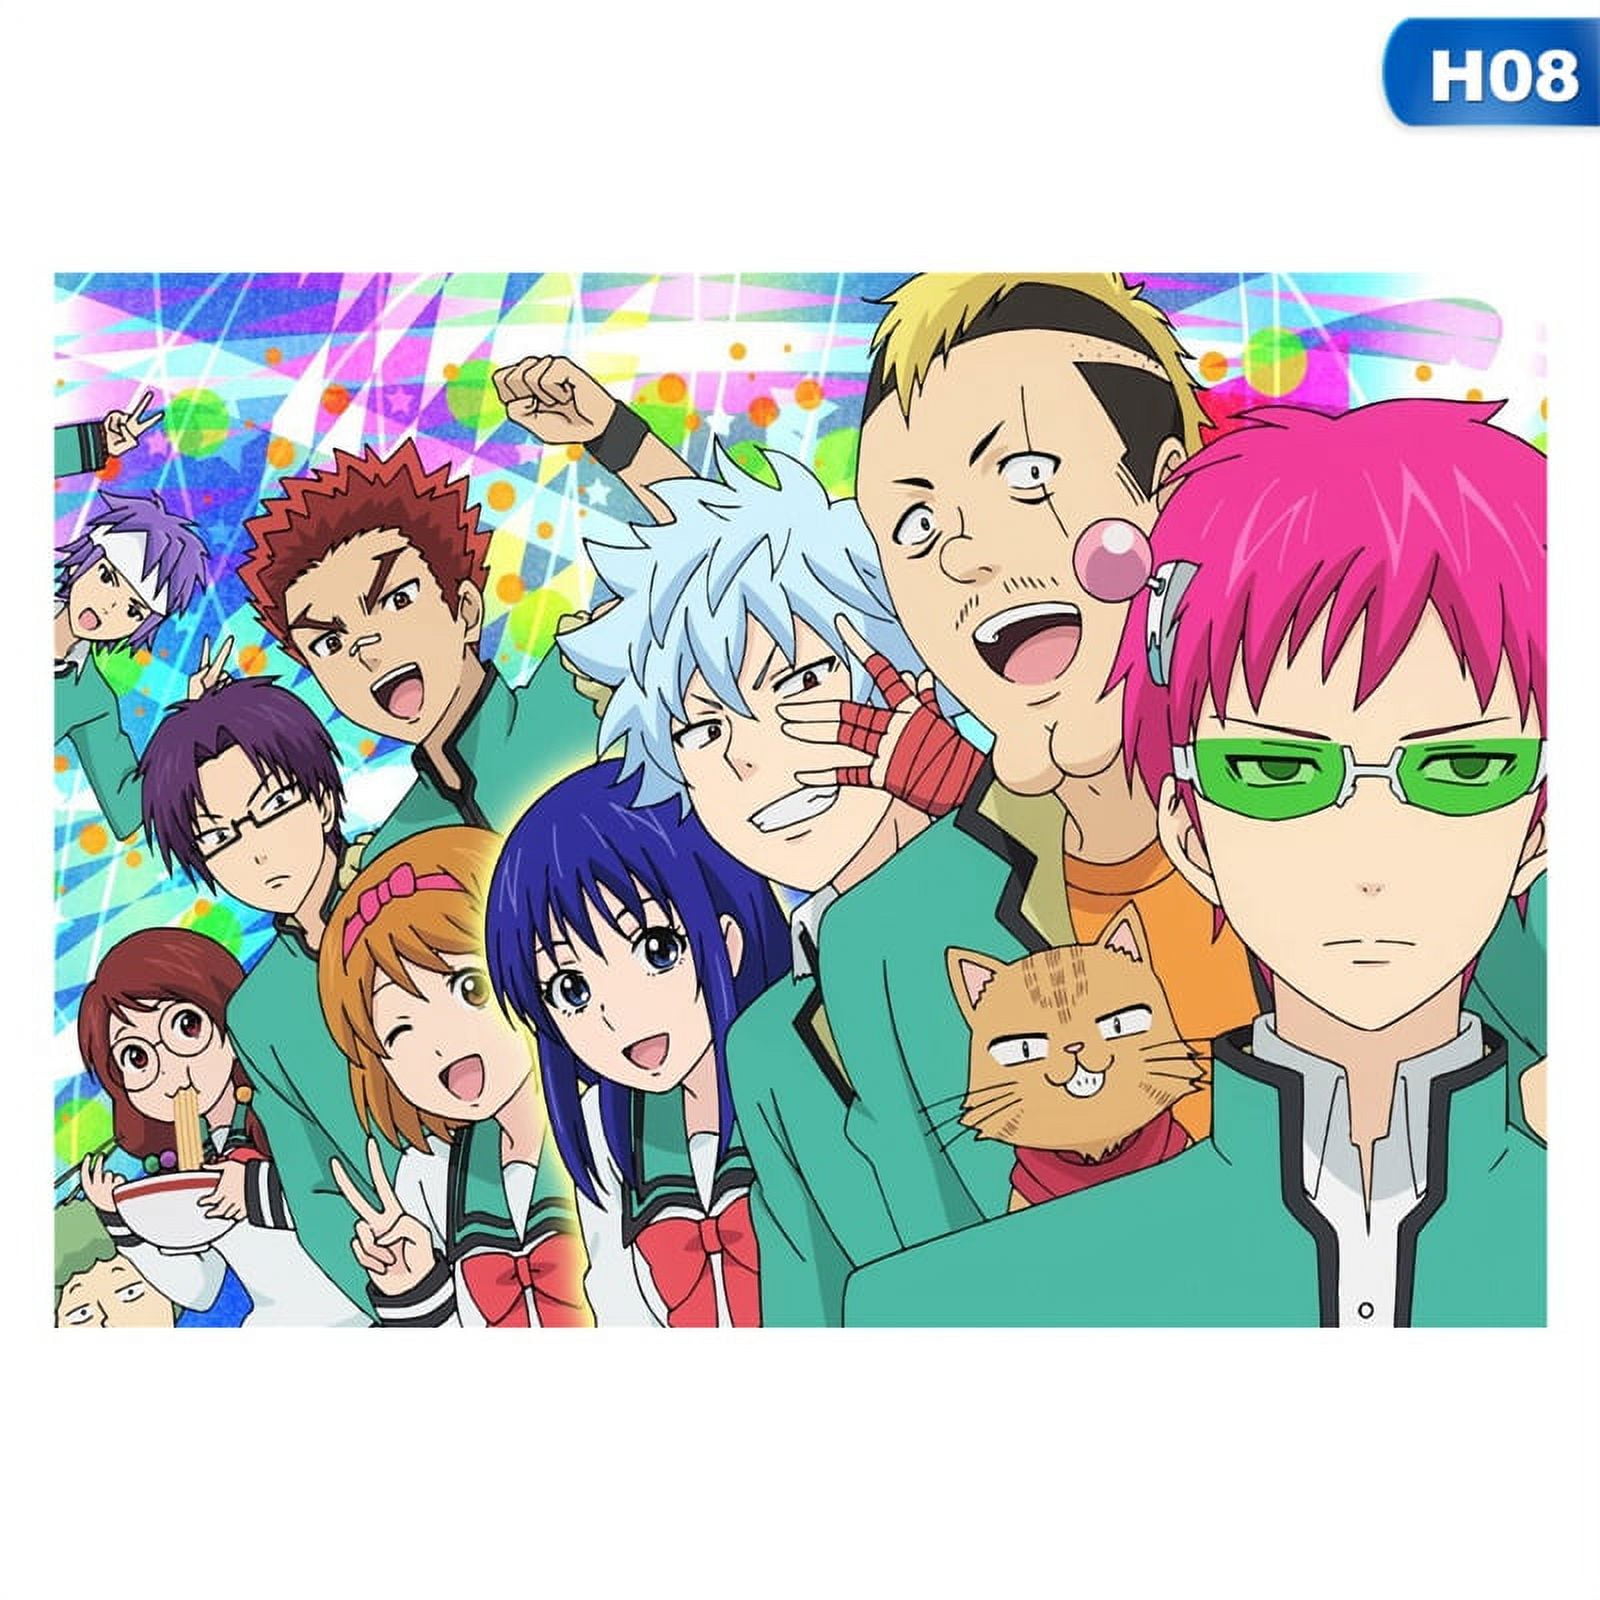 Looking at The Disastrous Life of Saiki K – OTAQUEST